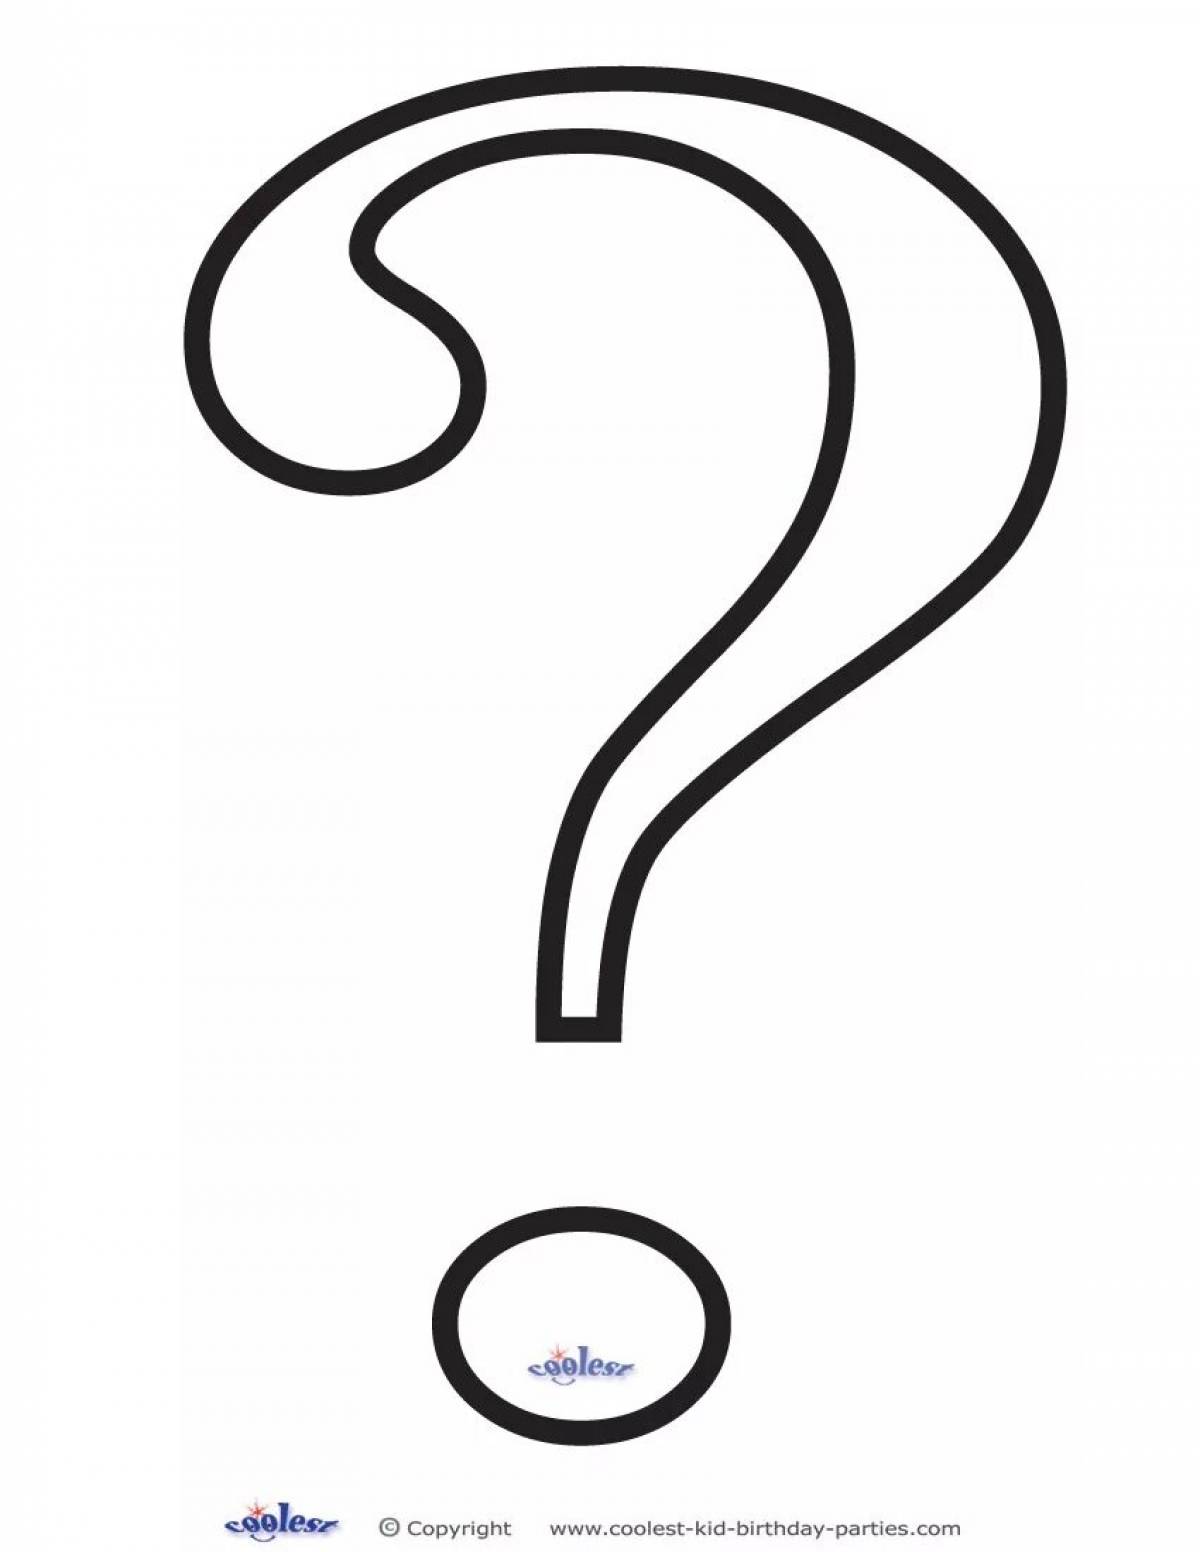 Intriguing question mark coloring page